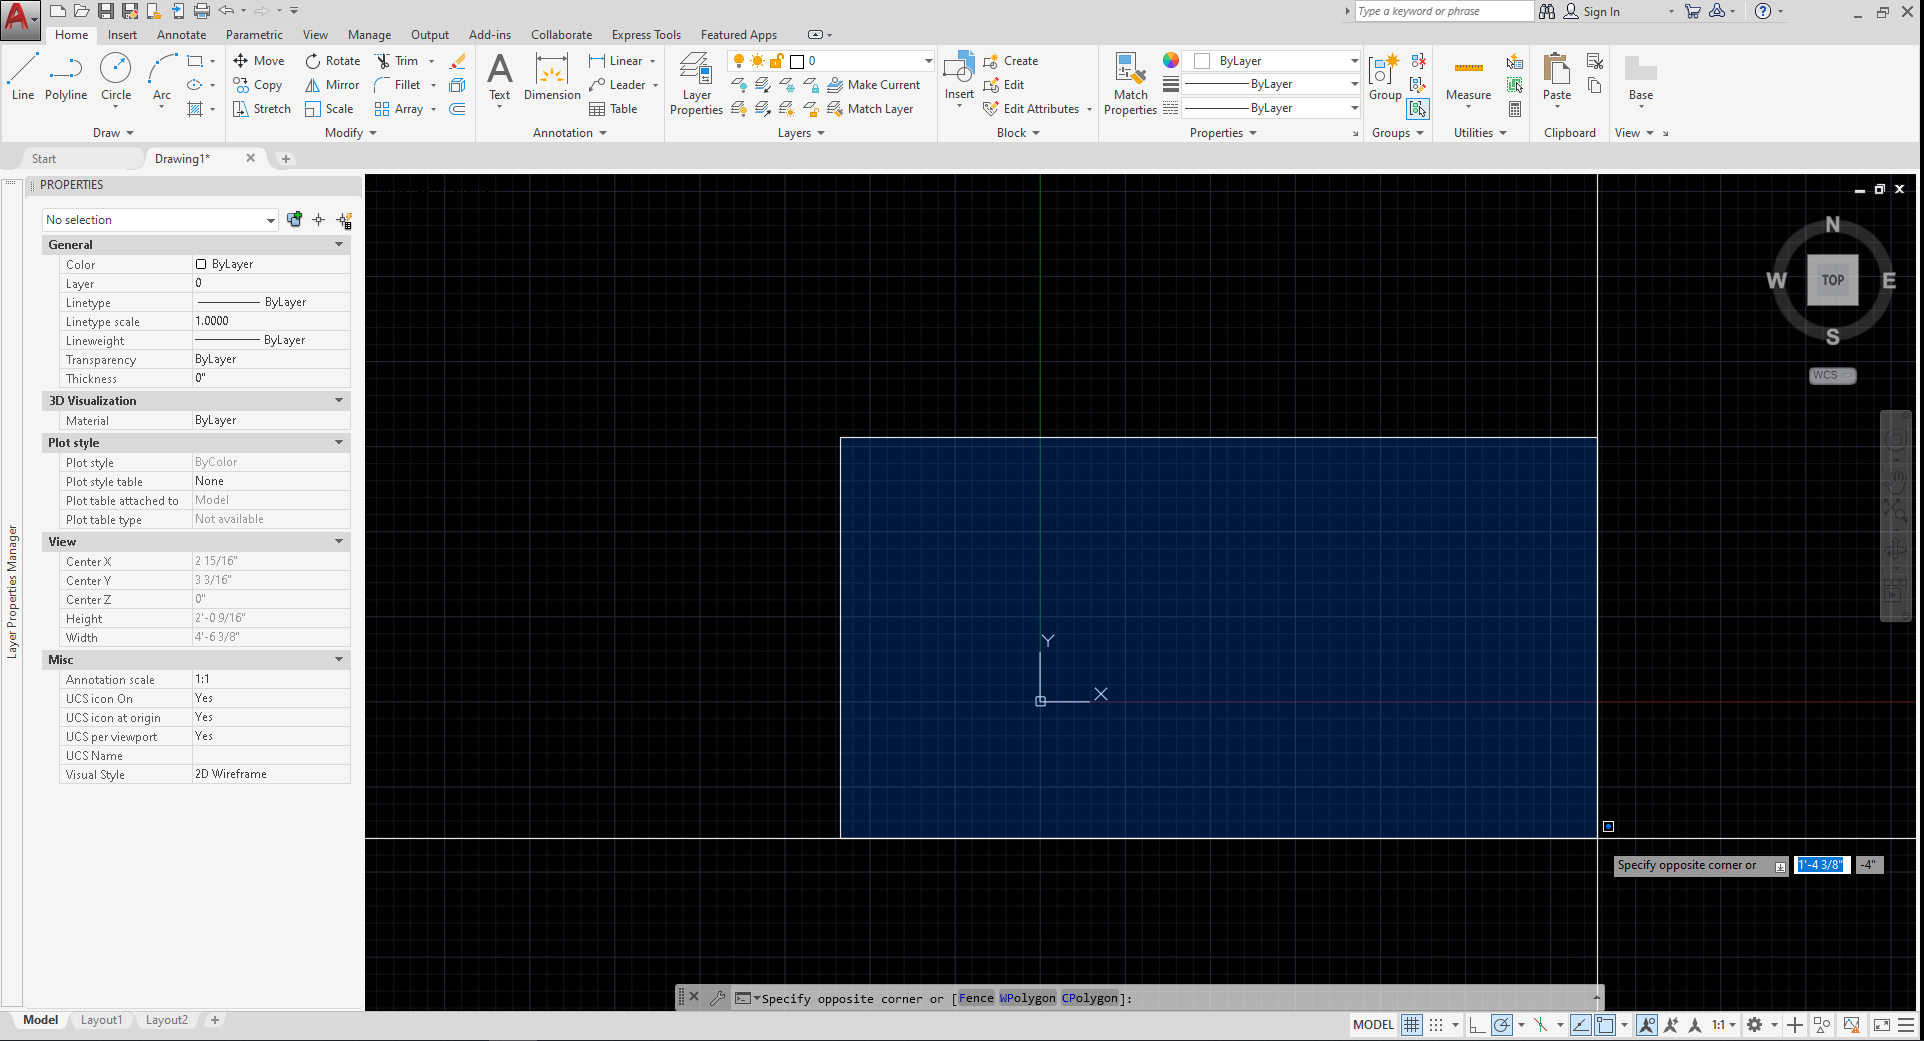 This image shows the result of window selection on AutoCAD software. The window selection shows in blue color.